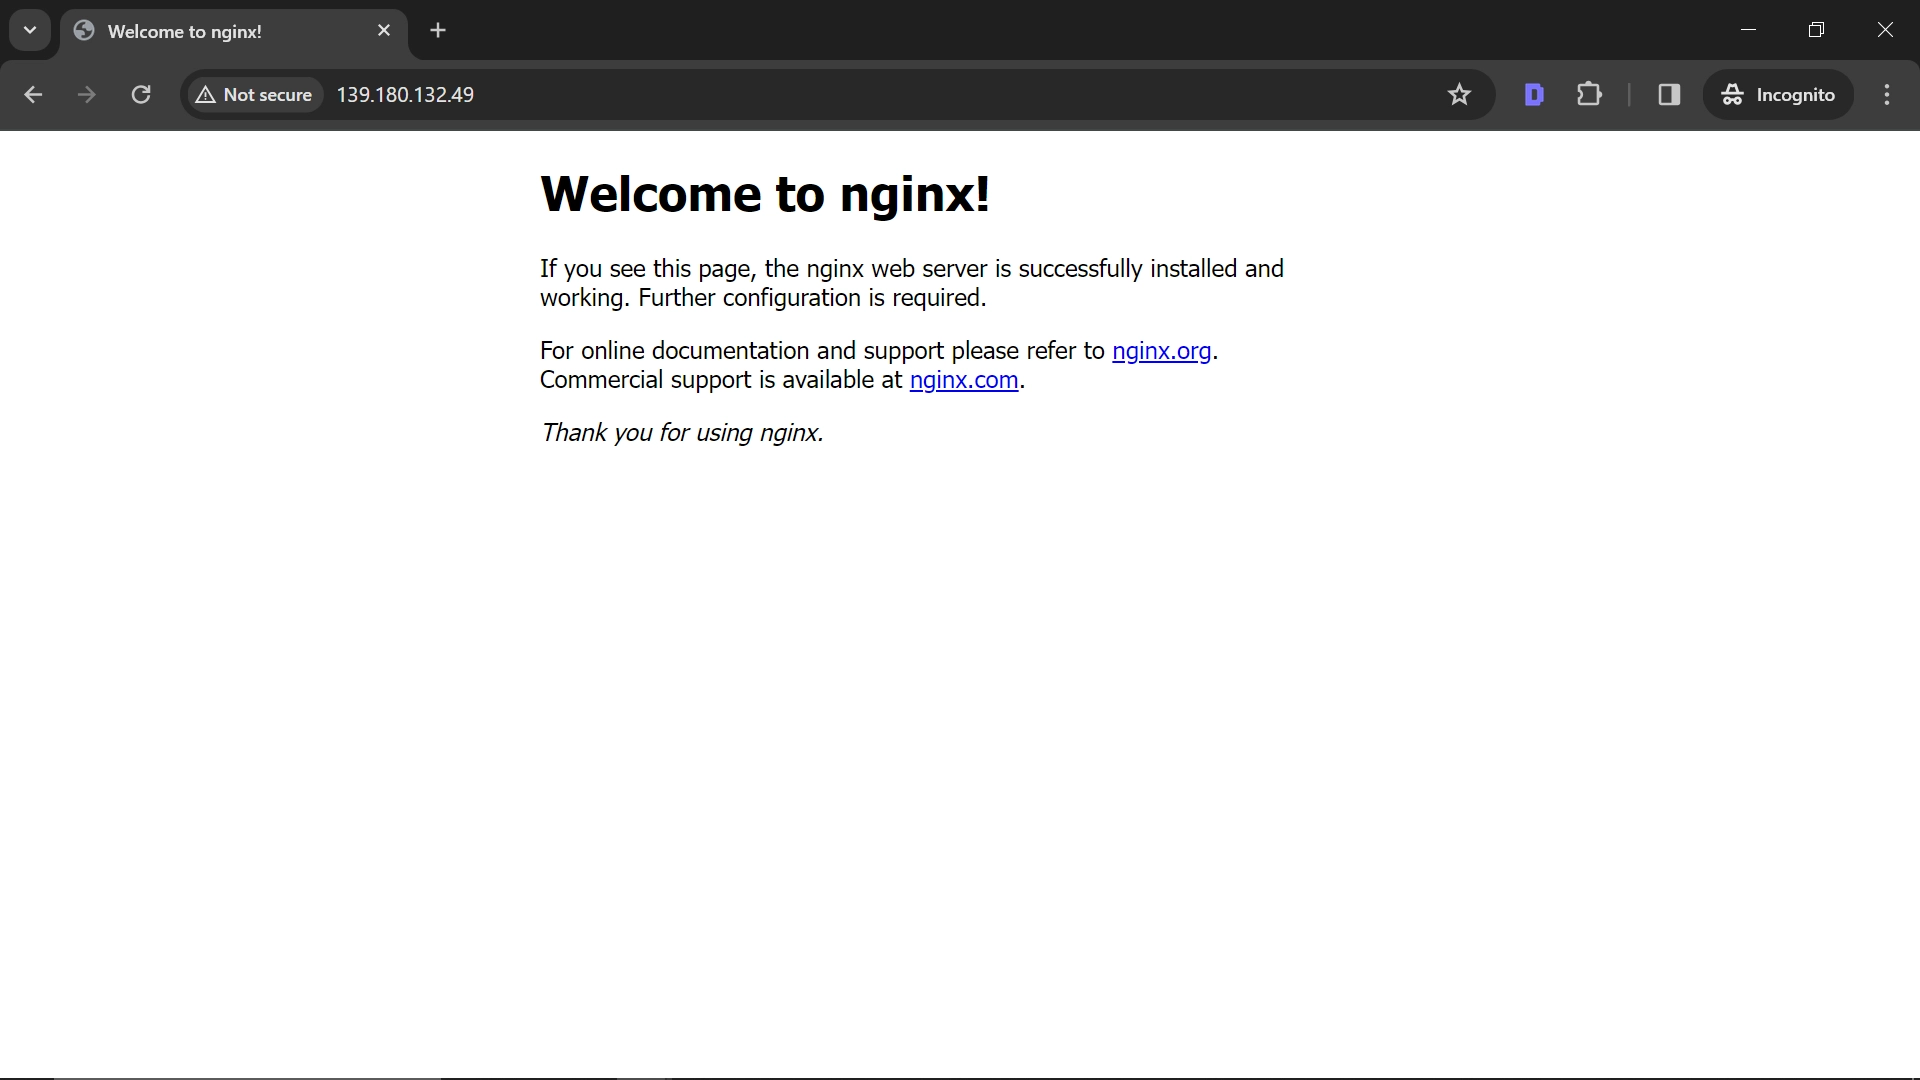 welcome-to-nginx